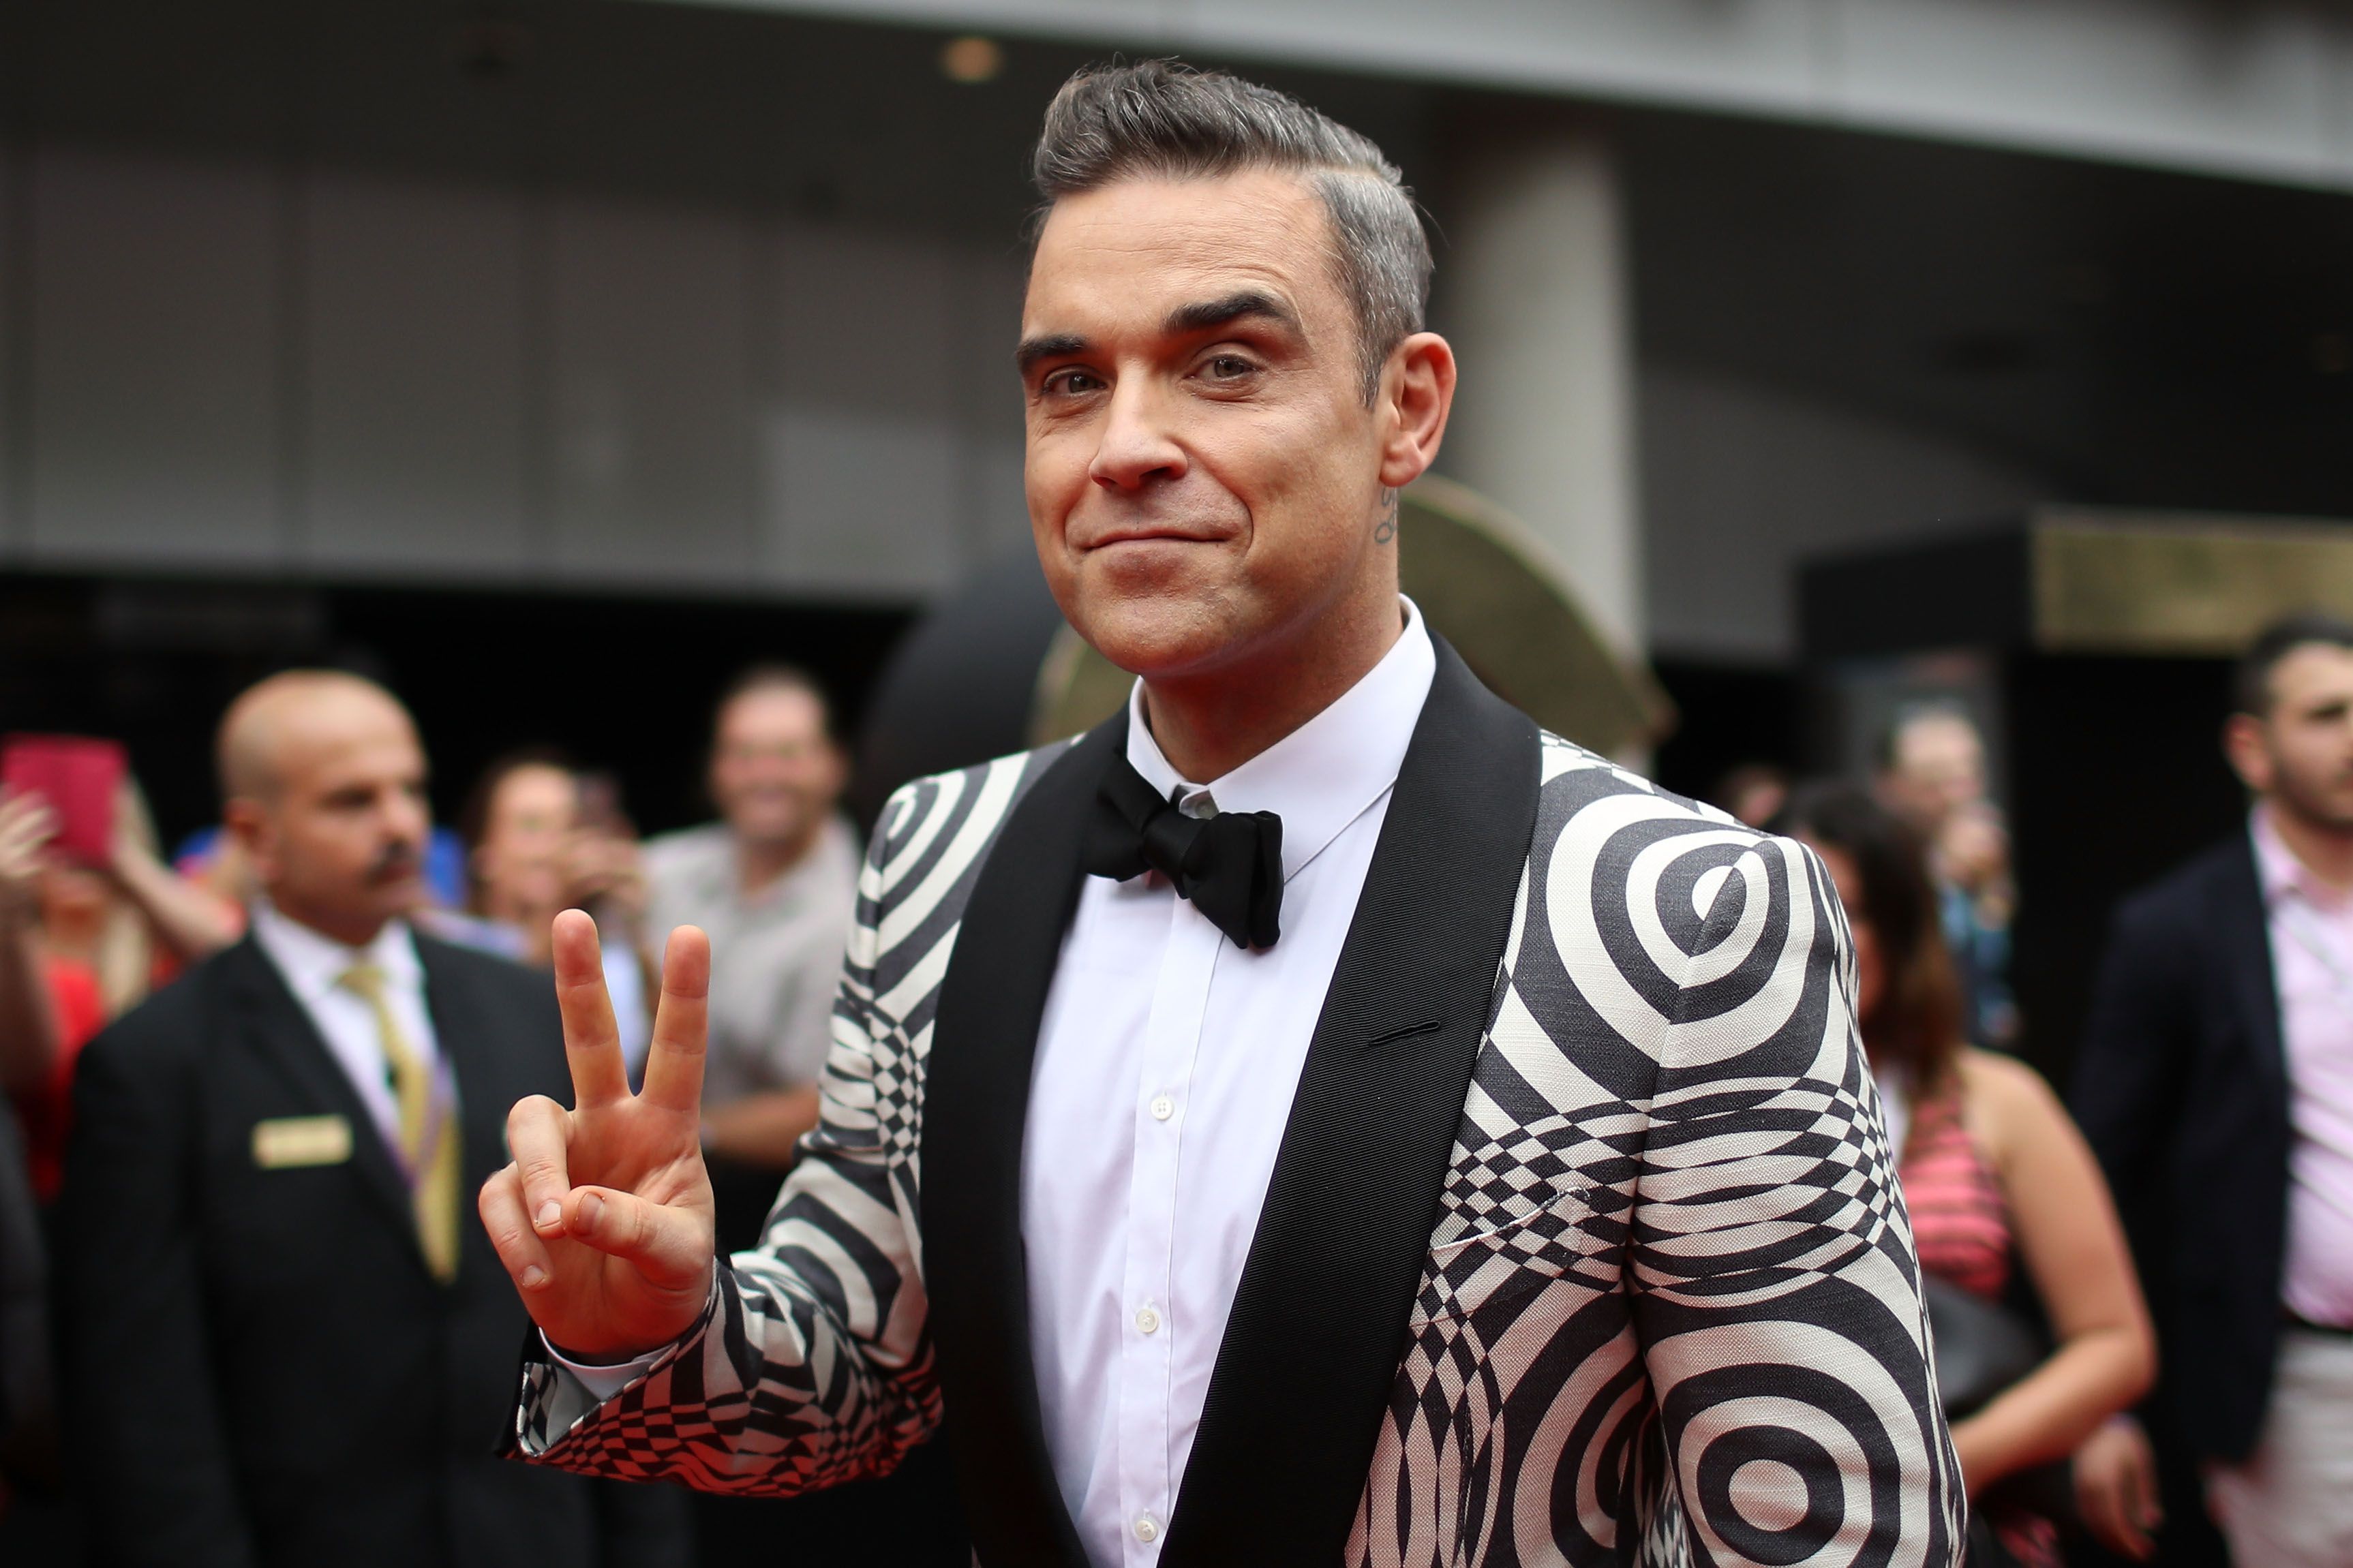 Robbie Williams at the 30th Annual ARIA Awards 2016 in Sydney, Australia | Source: Getty Images